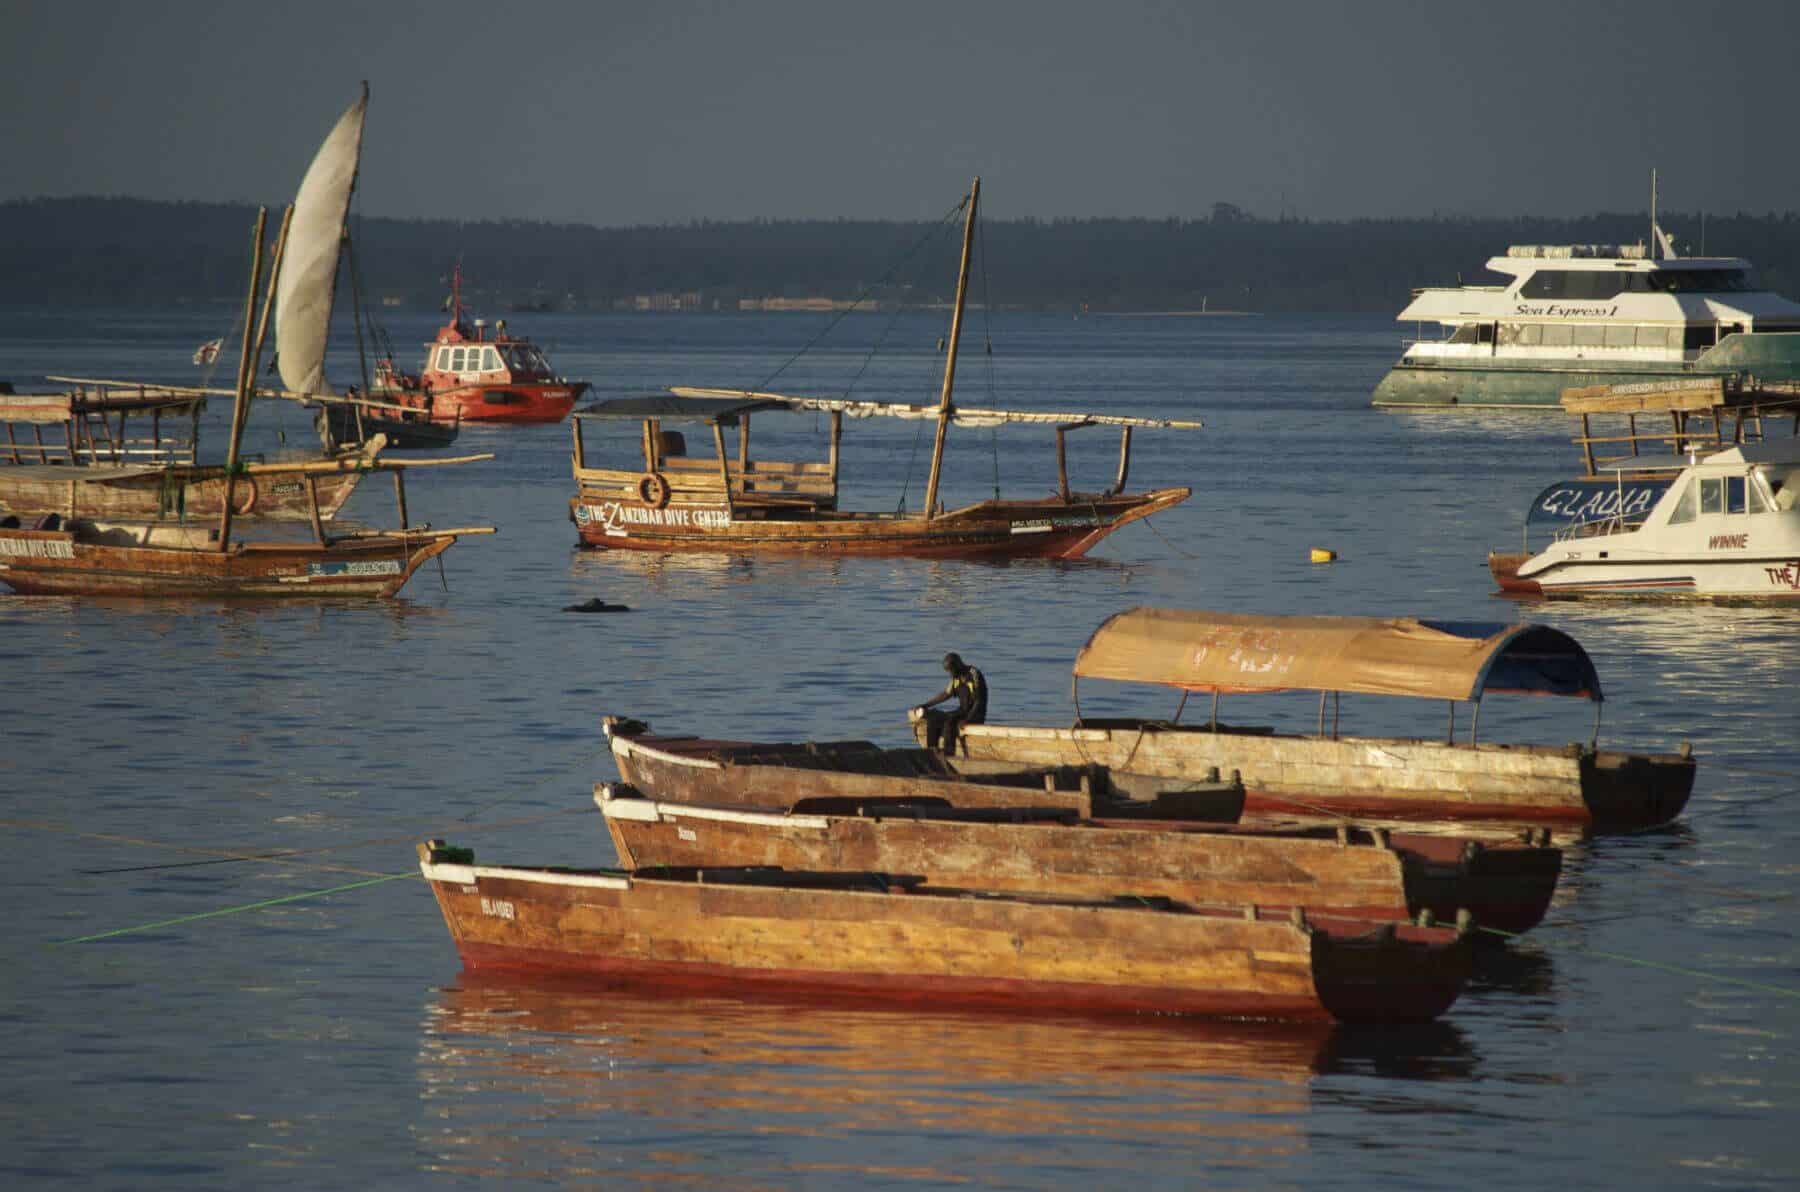 A bay in Zanzibar with several boat in the water